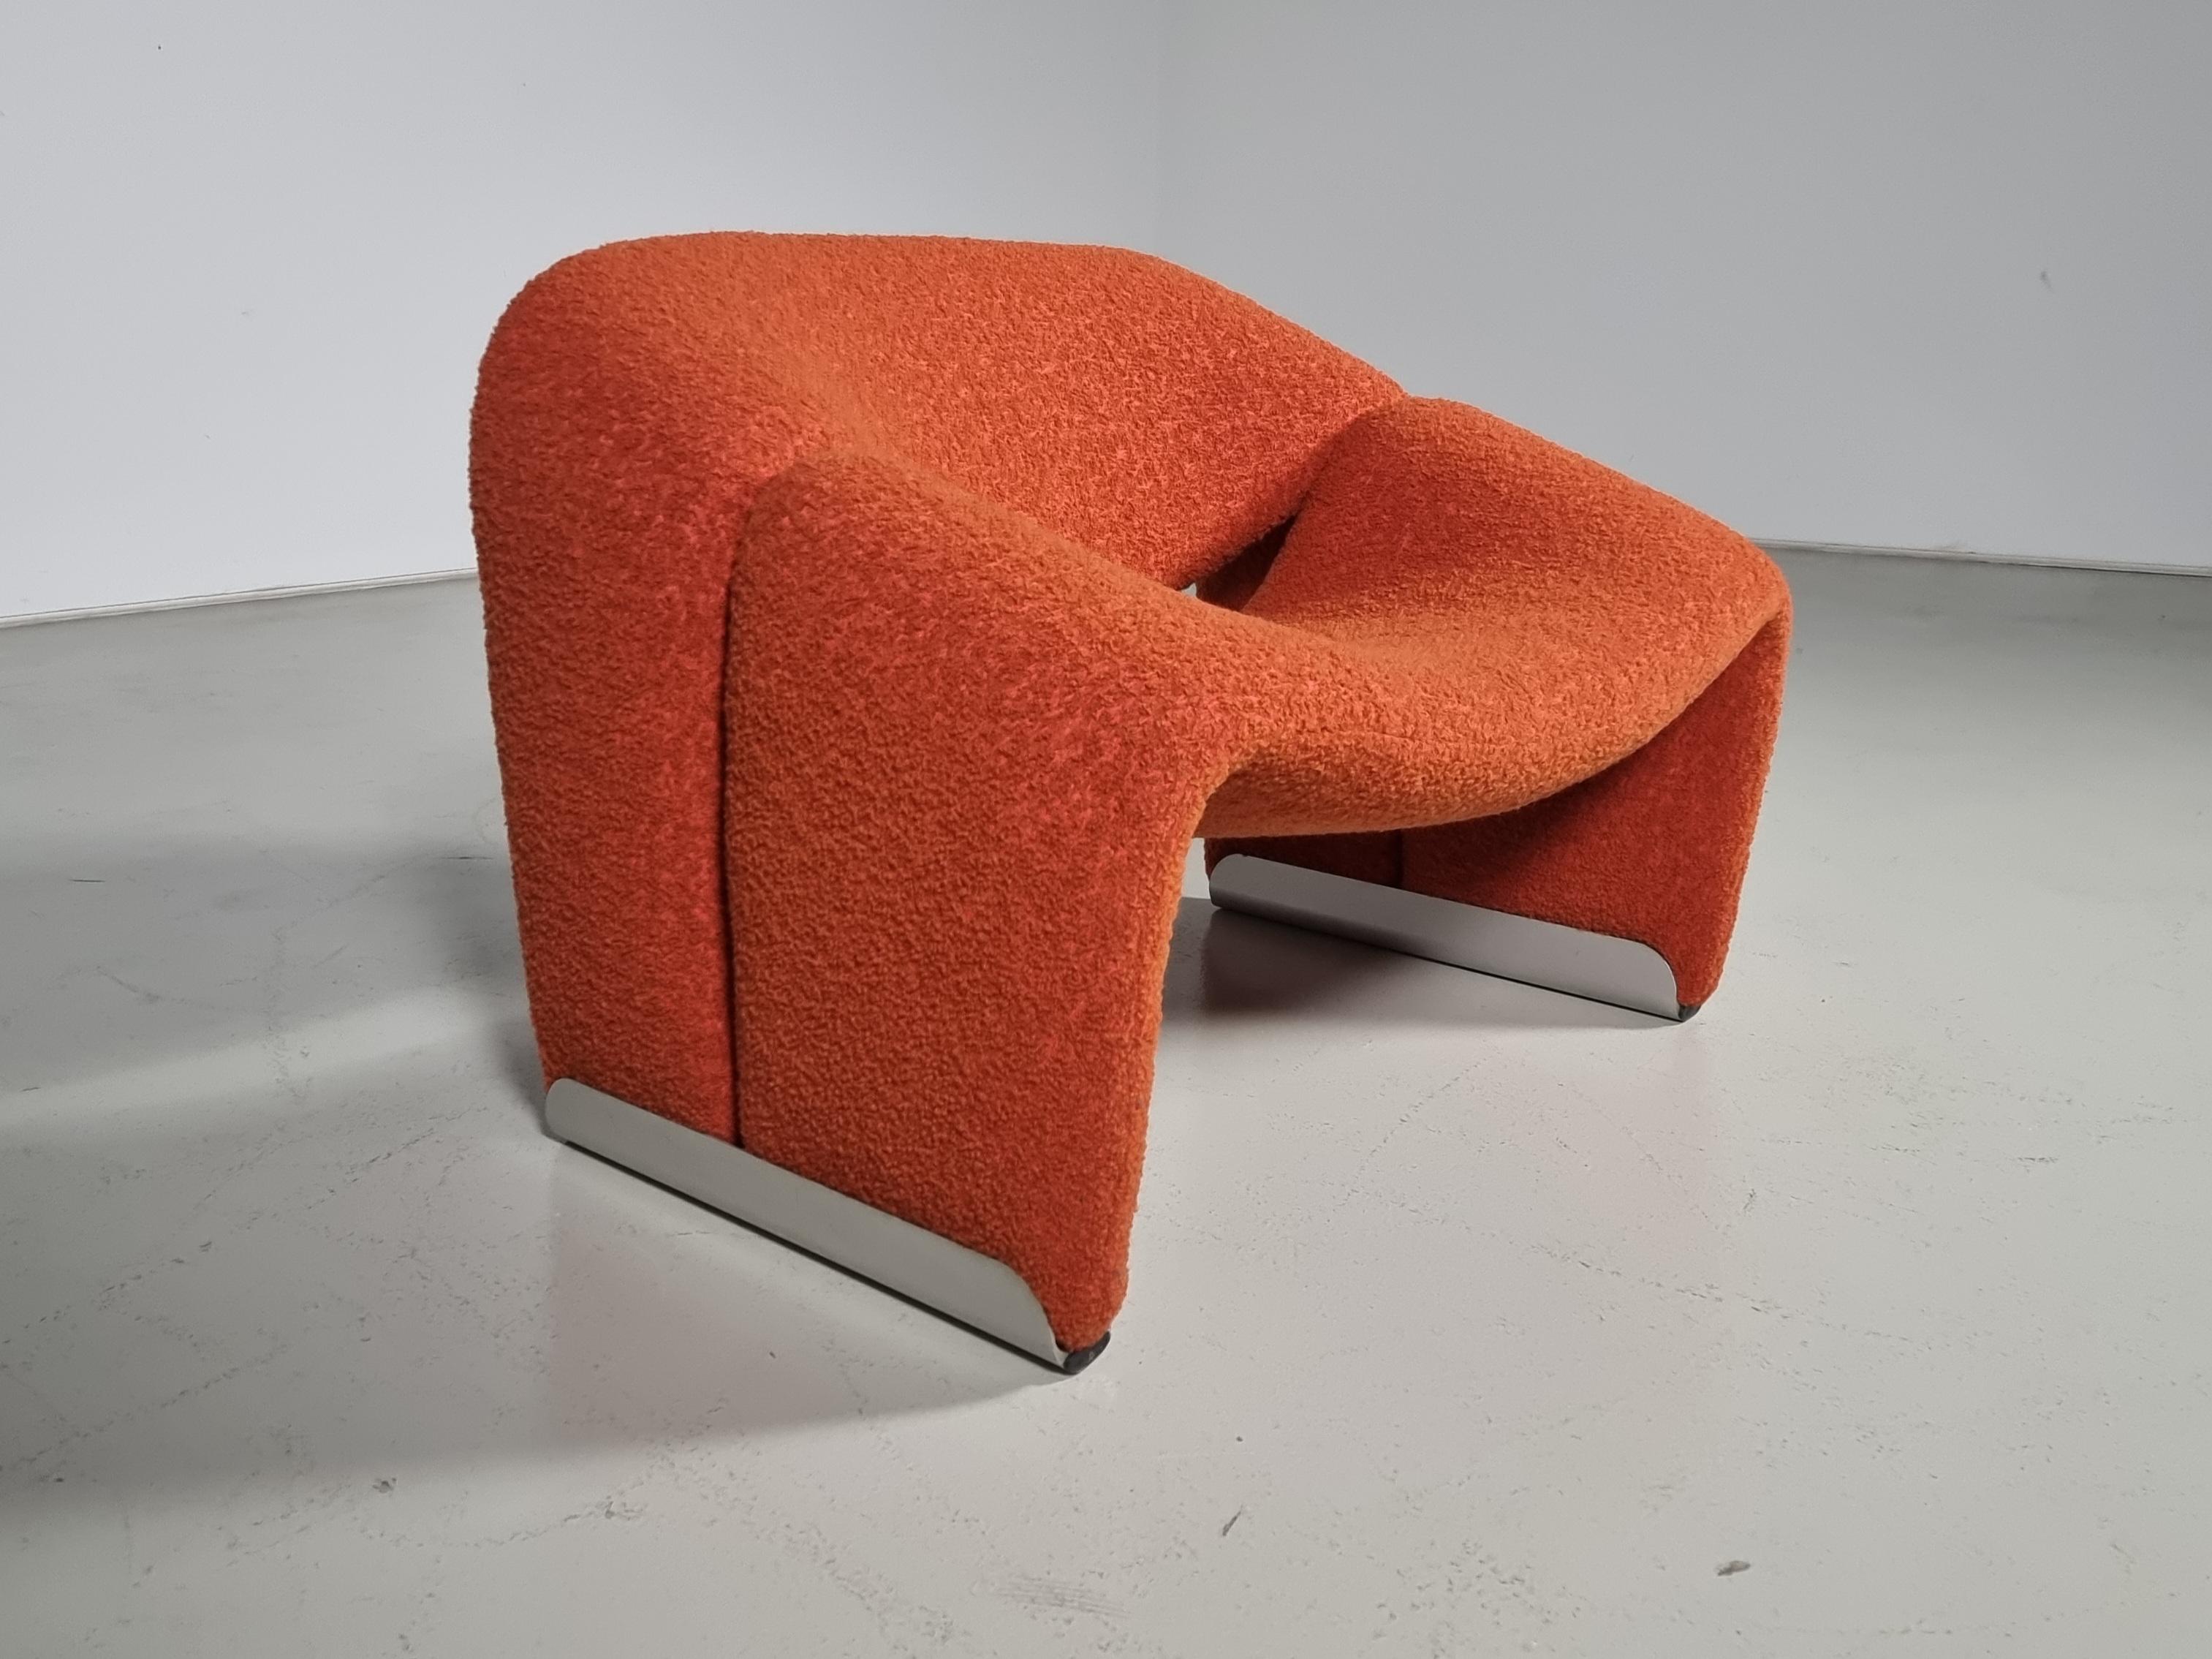 European F598 Groovy 'M' Chair in orange/red boucle by Pierre Paulin for Artifort, 1980s For Sale